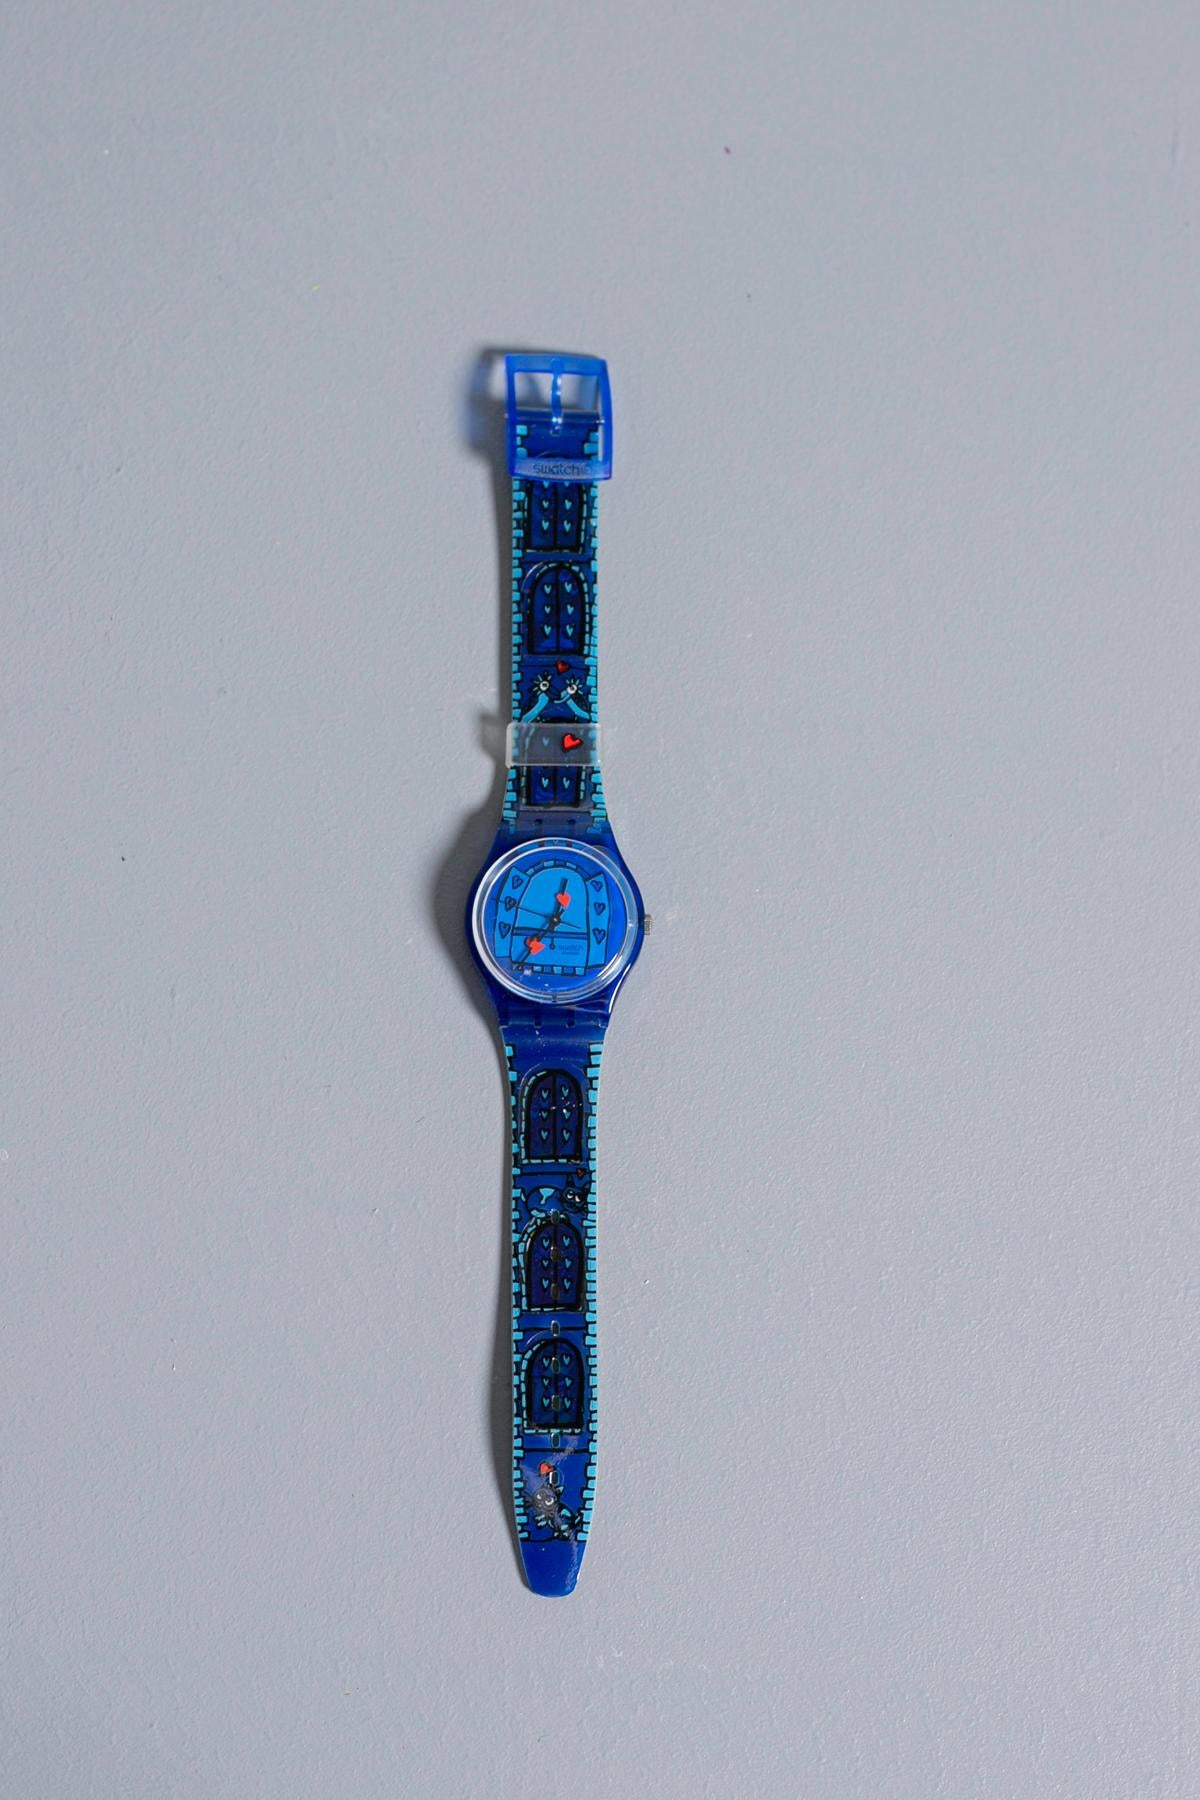 Swatch from the 2001 spring - summer collection dedicated to lovers. The watch has blue and light blue color comic-like designs on the strap and dial. The most beautiful feature are the hearts on the hands of the watch, as if to remind the wearer of